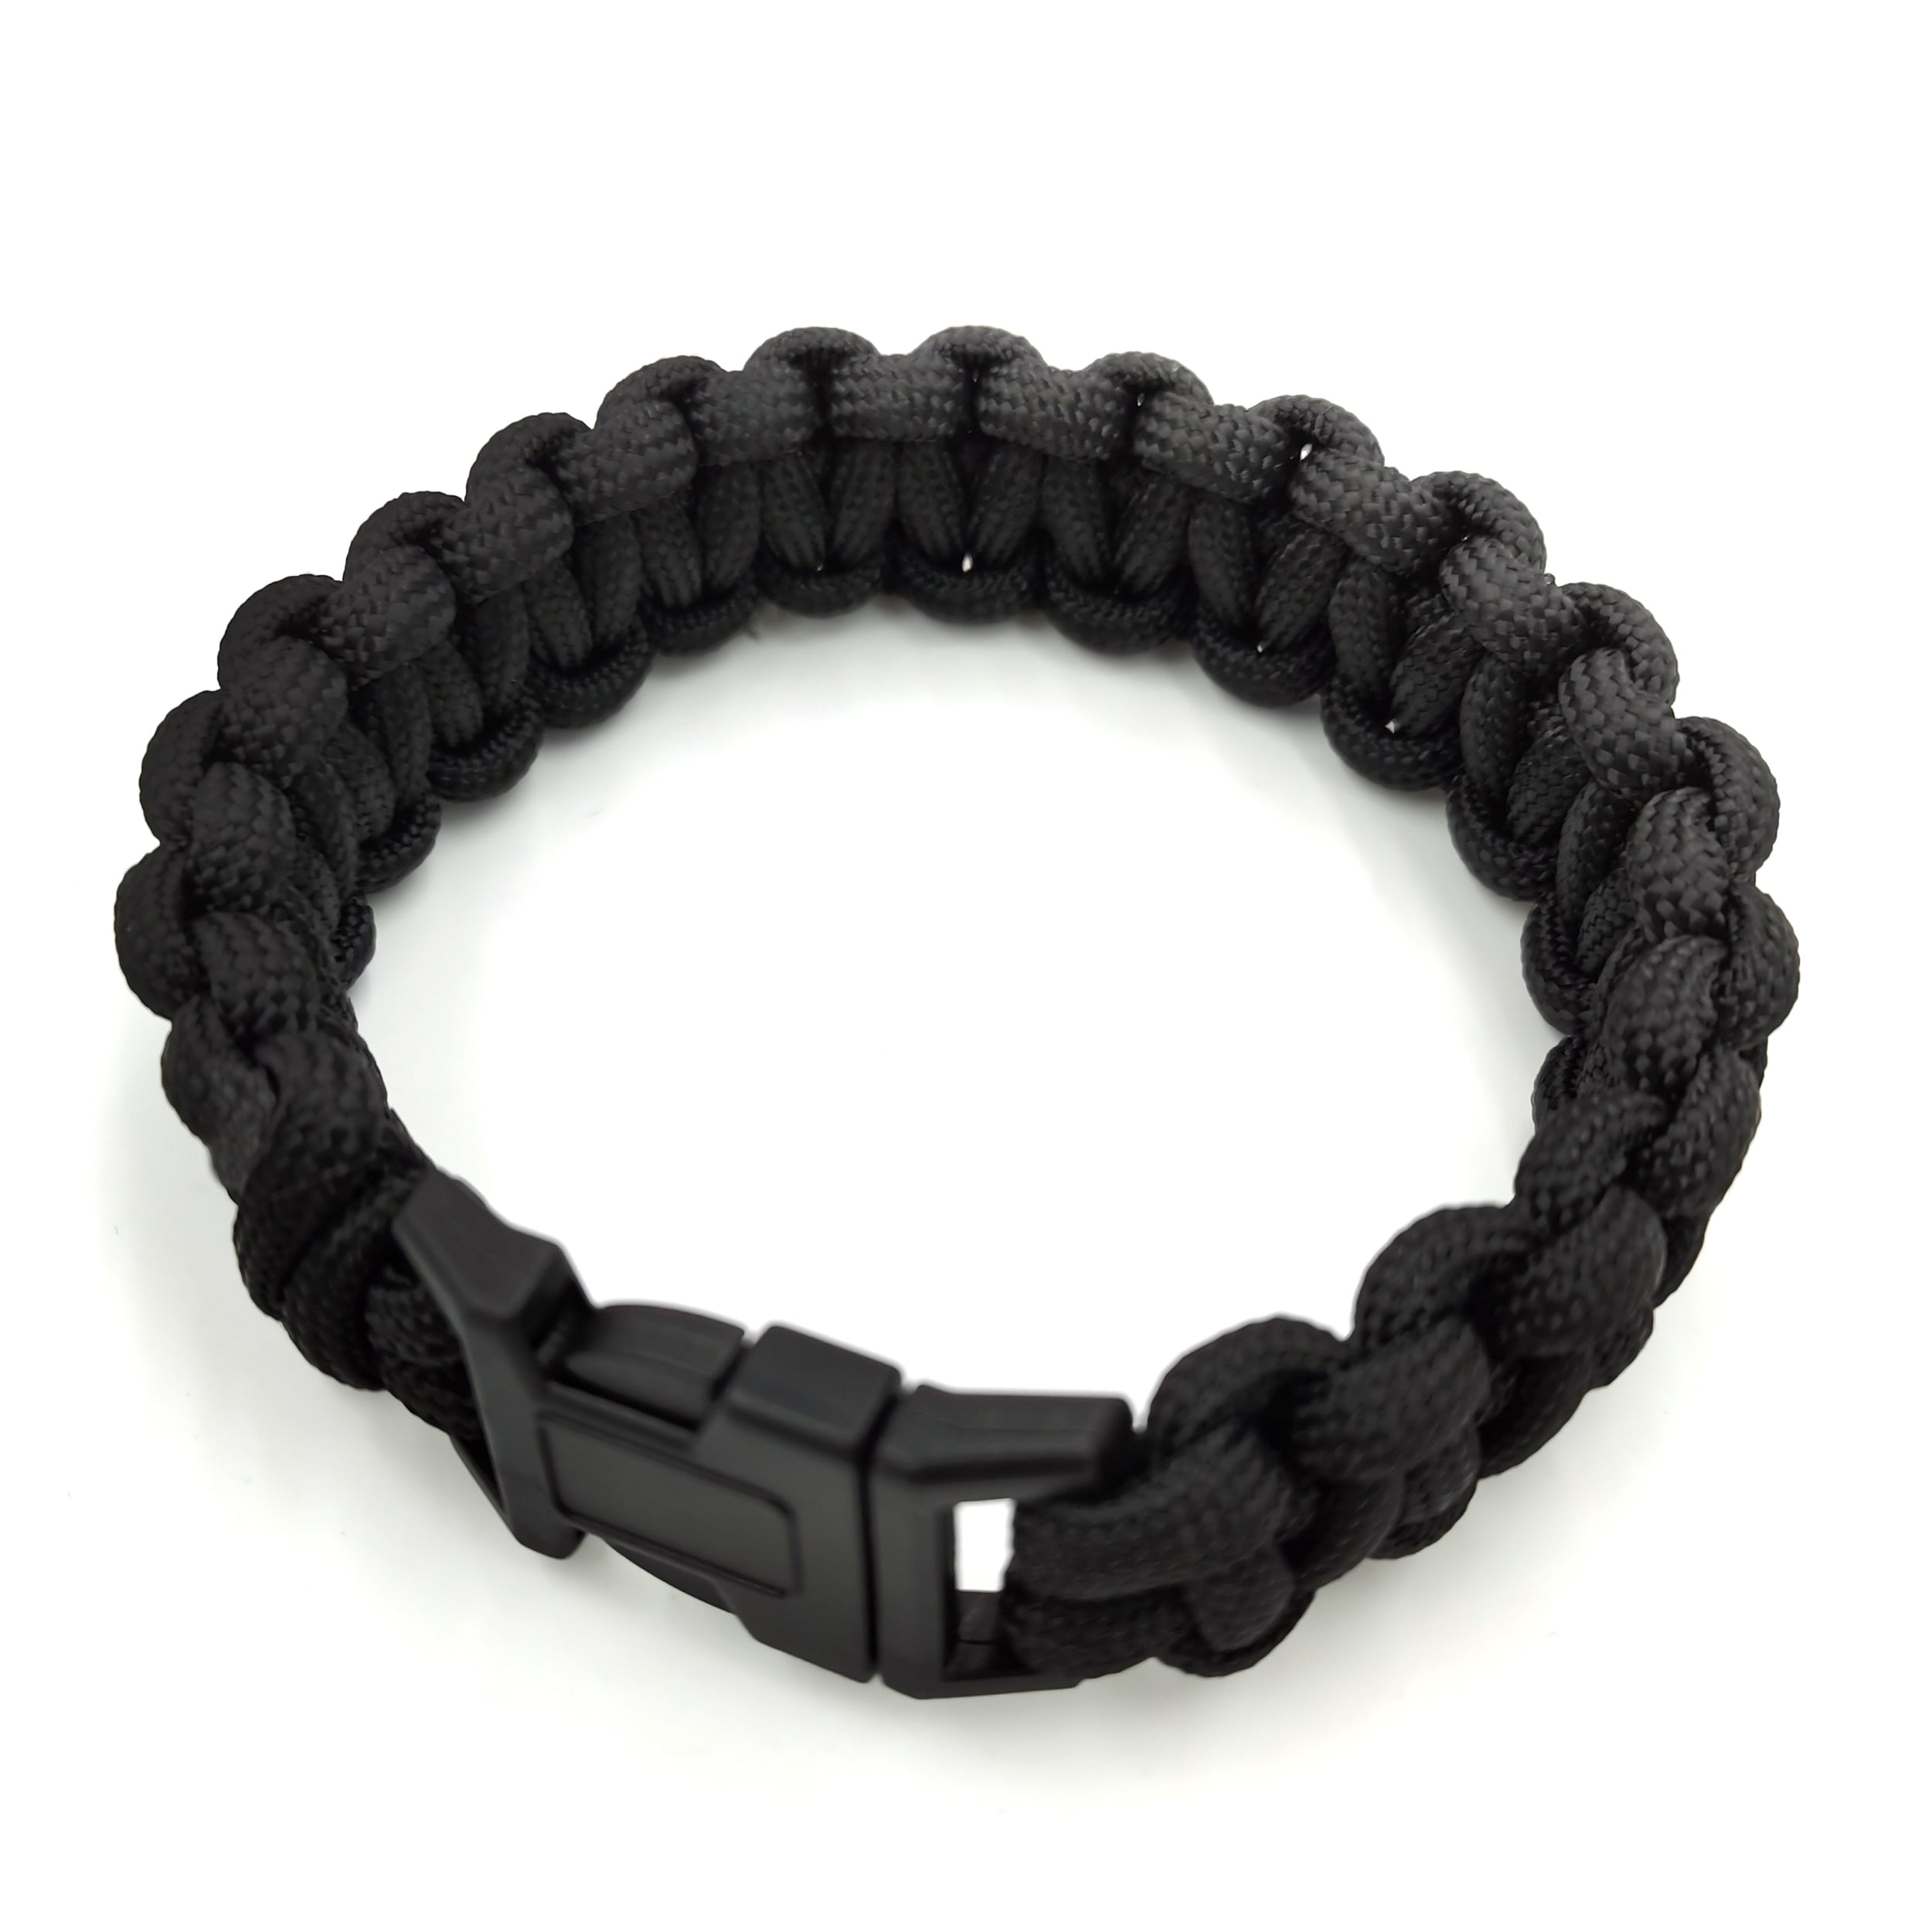 Black Paracord Rescue Paracord Survival Bracelet With 550 Rope And Tight  Braided Buckle For Tent Escape From Yiwujiahuajewelry, $0.72